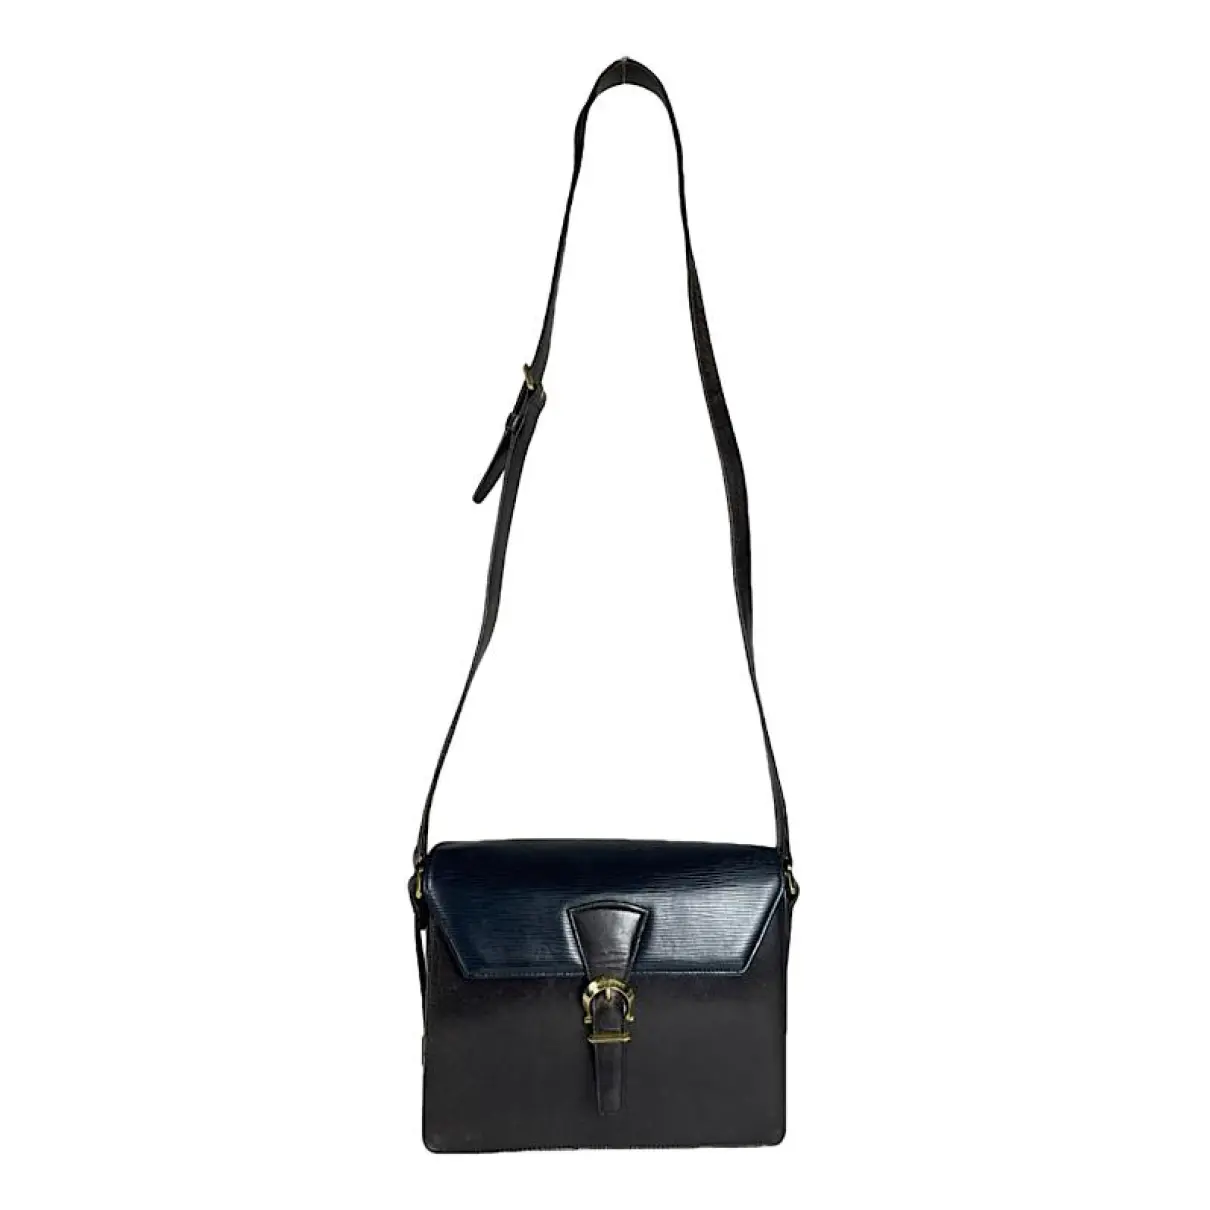 Panther bag patent leather crossbody bag